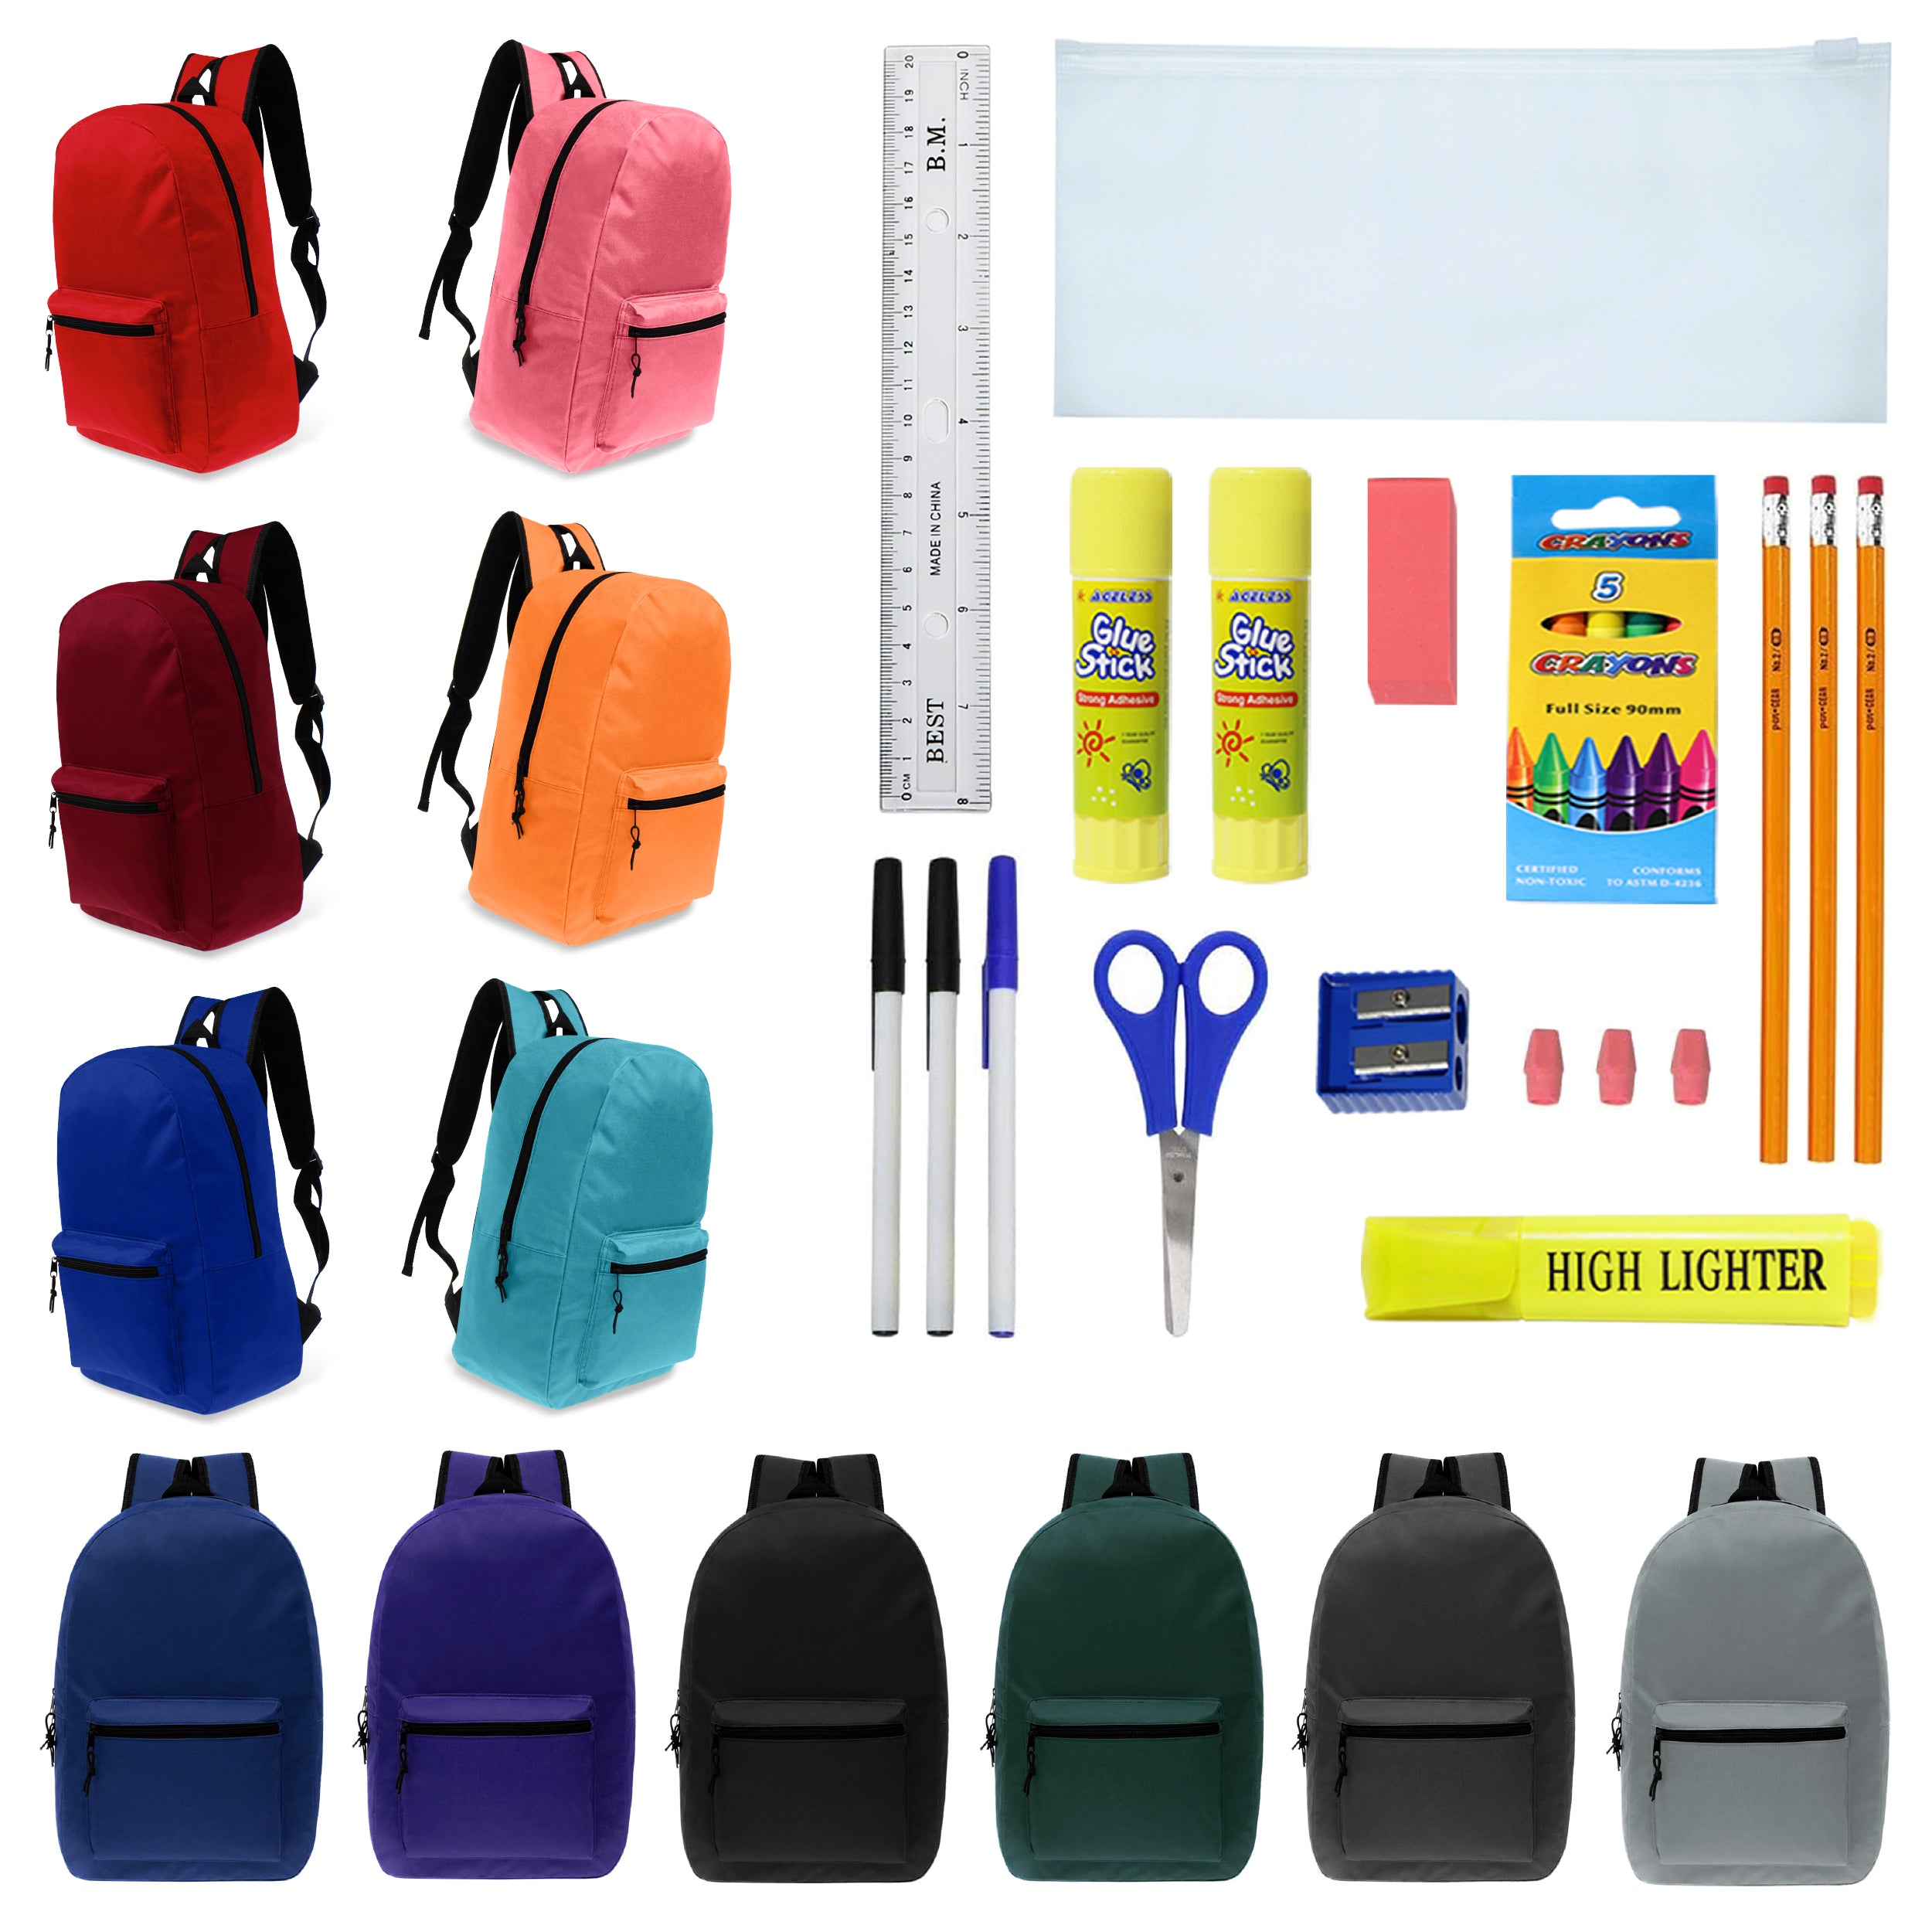 17 Inch Wholesale Backpacks in Assorted Colors with School Supply Kits Bulk - Case of 12